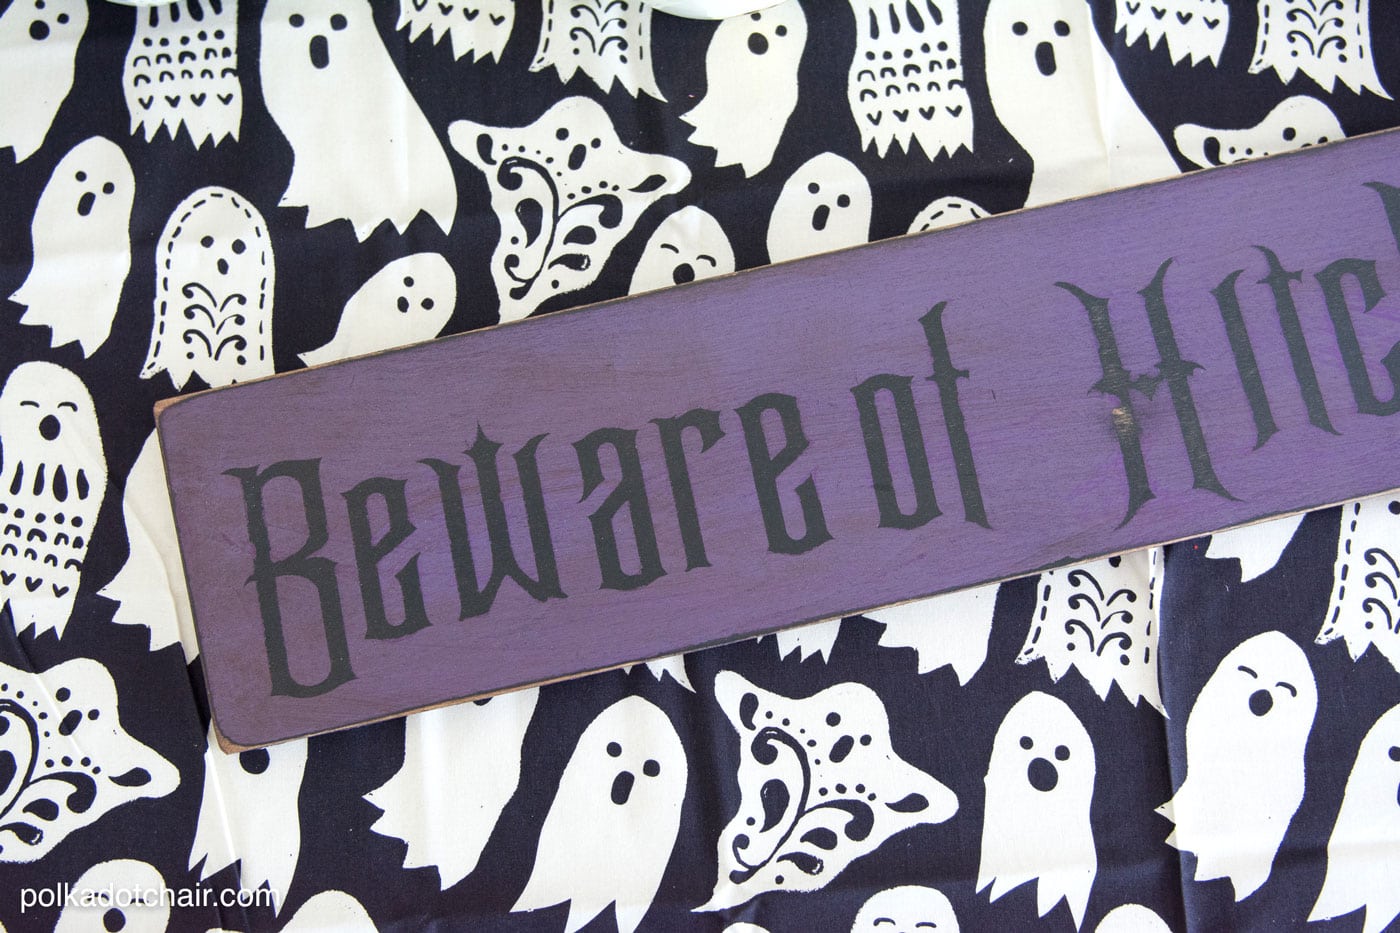 diy-wood-halloween-sign-tutorial-and-haunted-mansion-craft-idea-the-polka-dot-chair